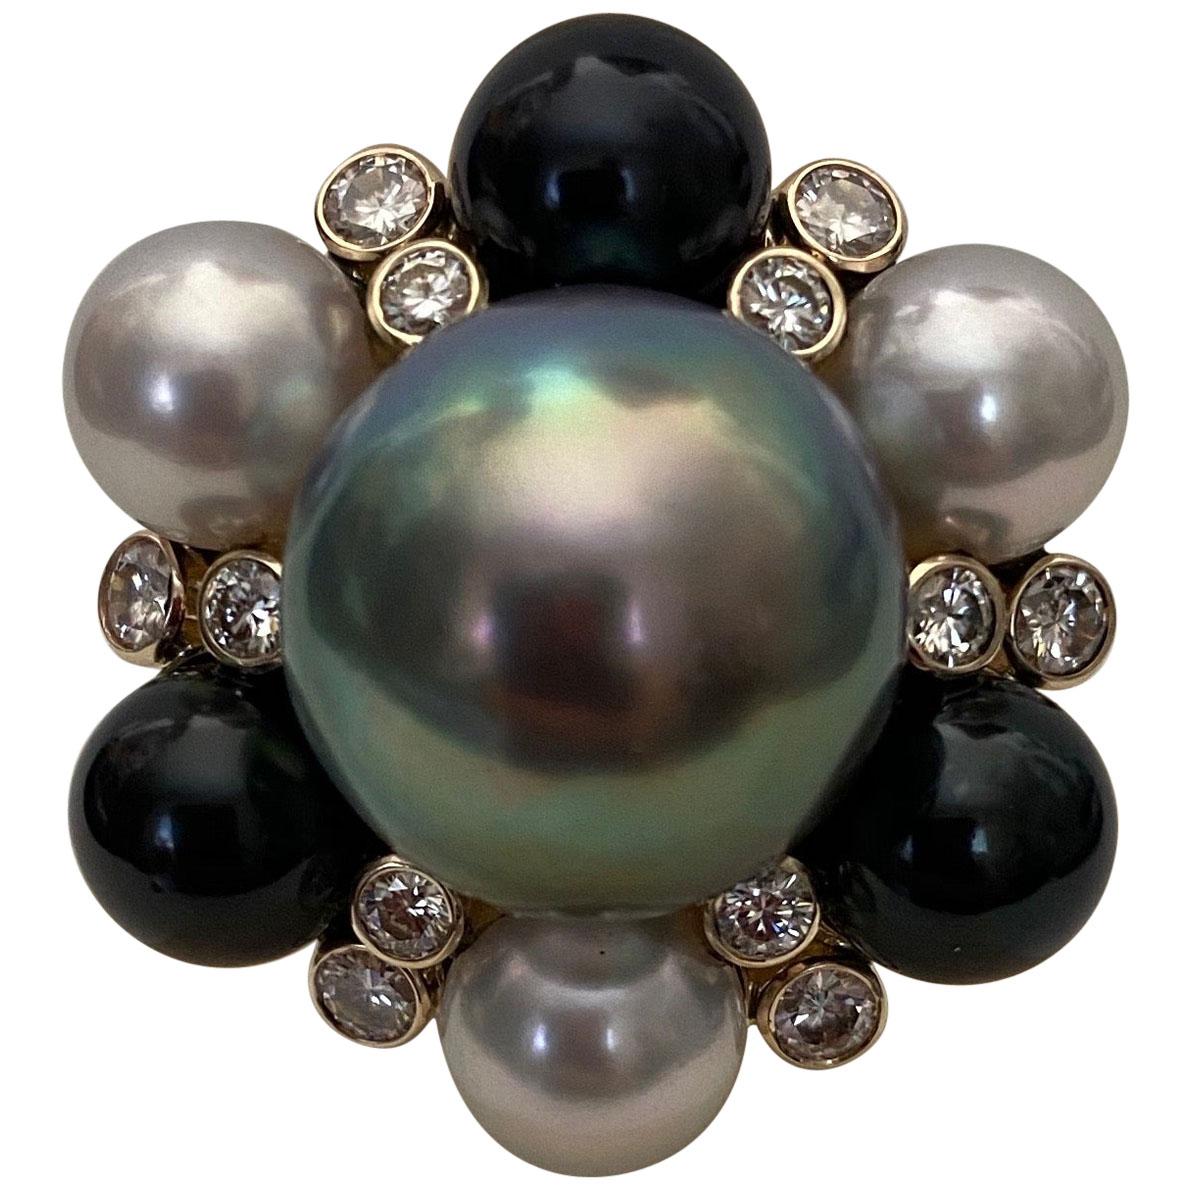 A 15mm dove gray Tahitian pearl is featured in this impressive cocktail ring.  The gem quality pearl has a  lustrous rainbow nacre reflecting blues, pinks and greens.  The pearl is surrounded by 3 black and 3 white Akoya pearls of gem quality.  The